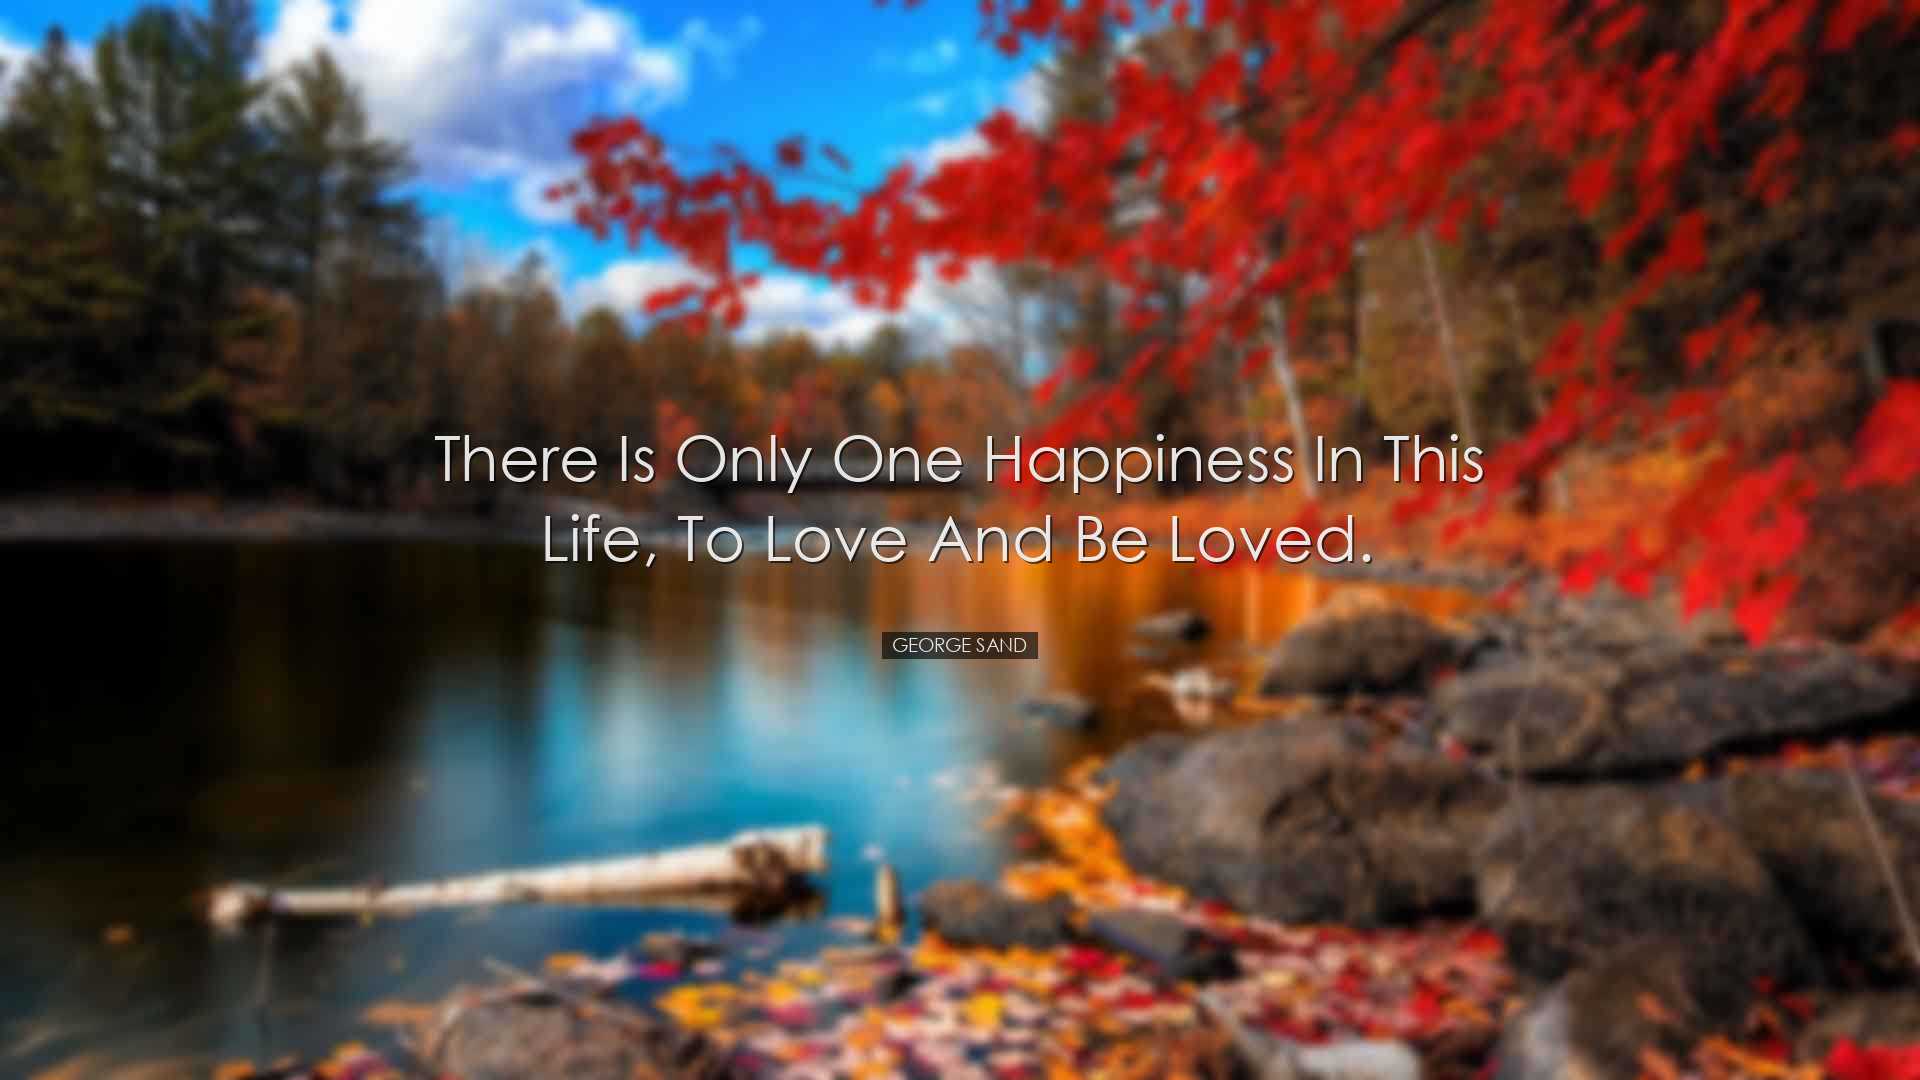 There is only one happiness in this life, to love and be loved. -